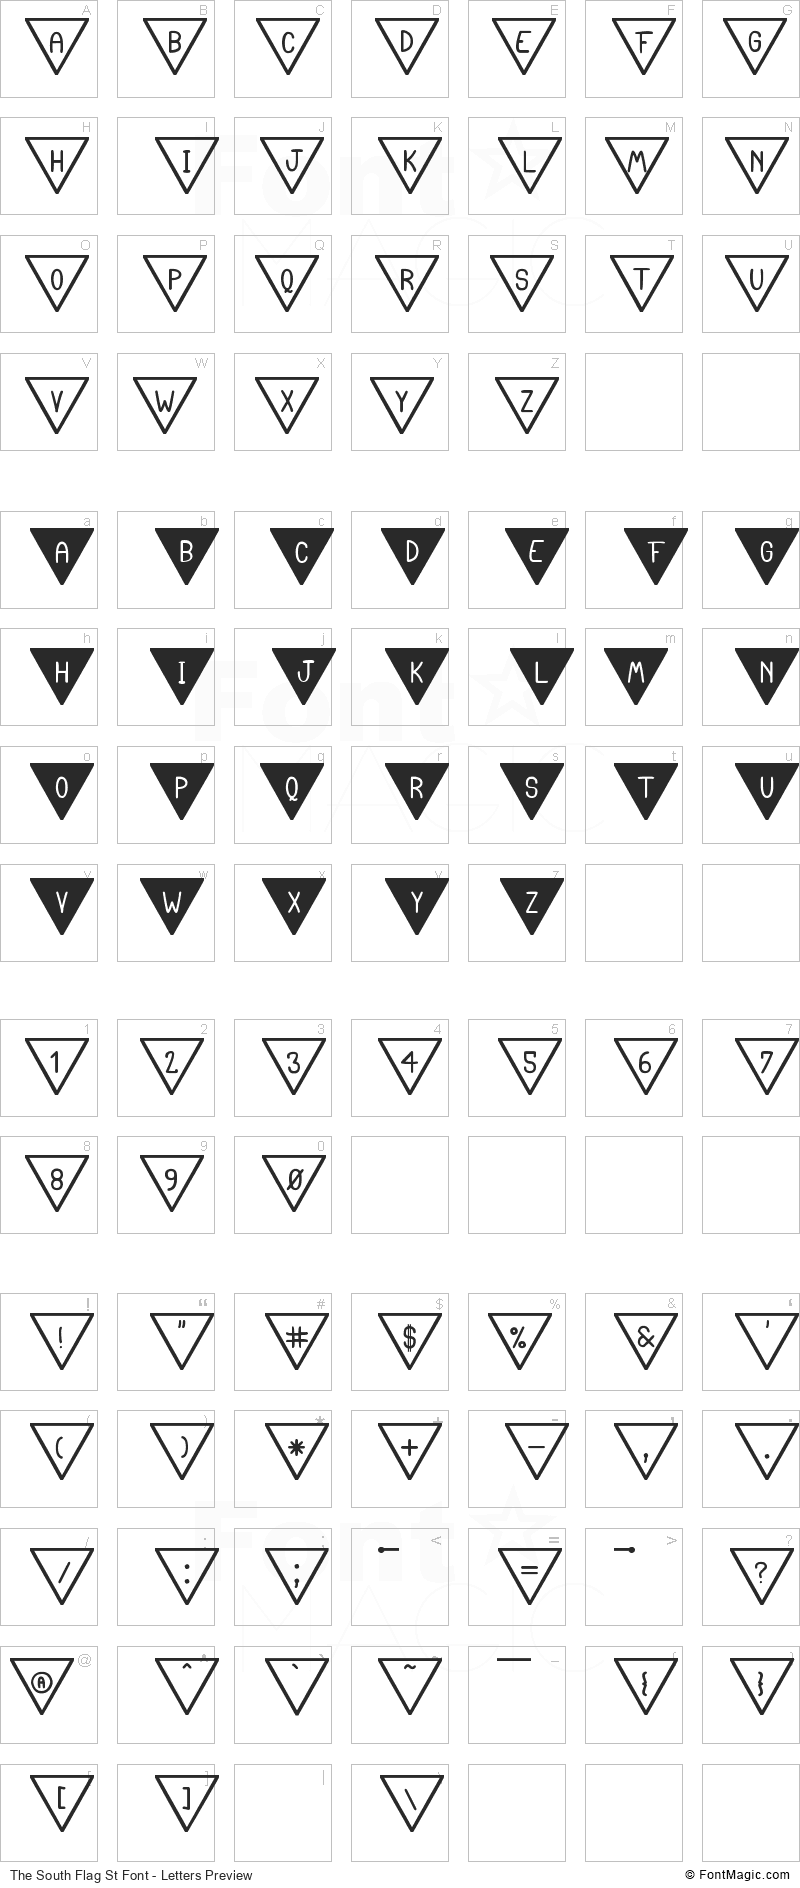 The South Flag St Font - All Latters Preview Chart